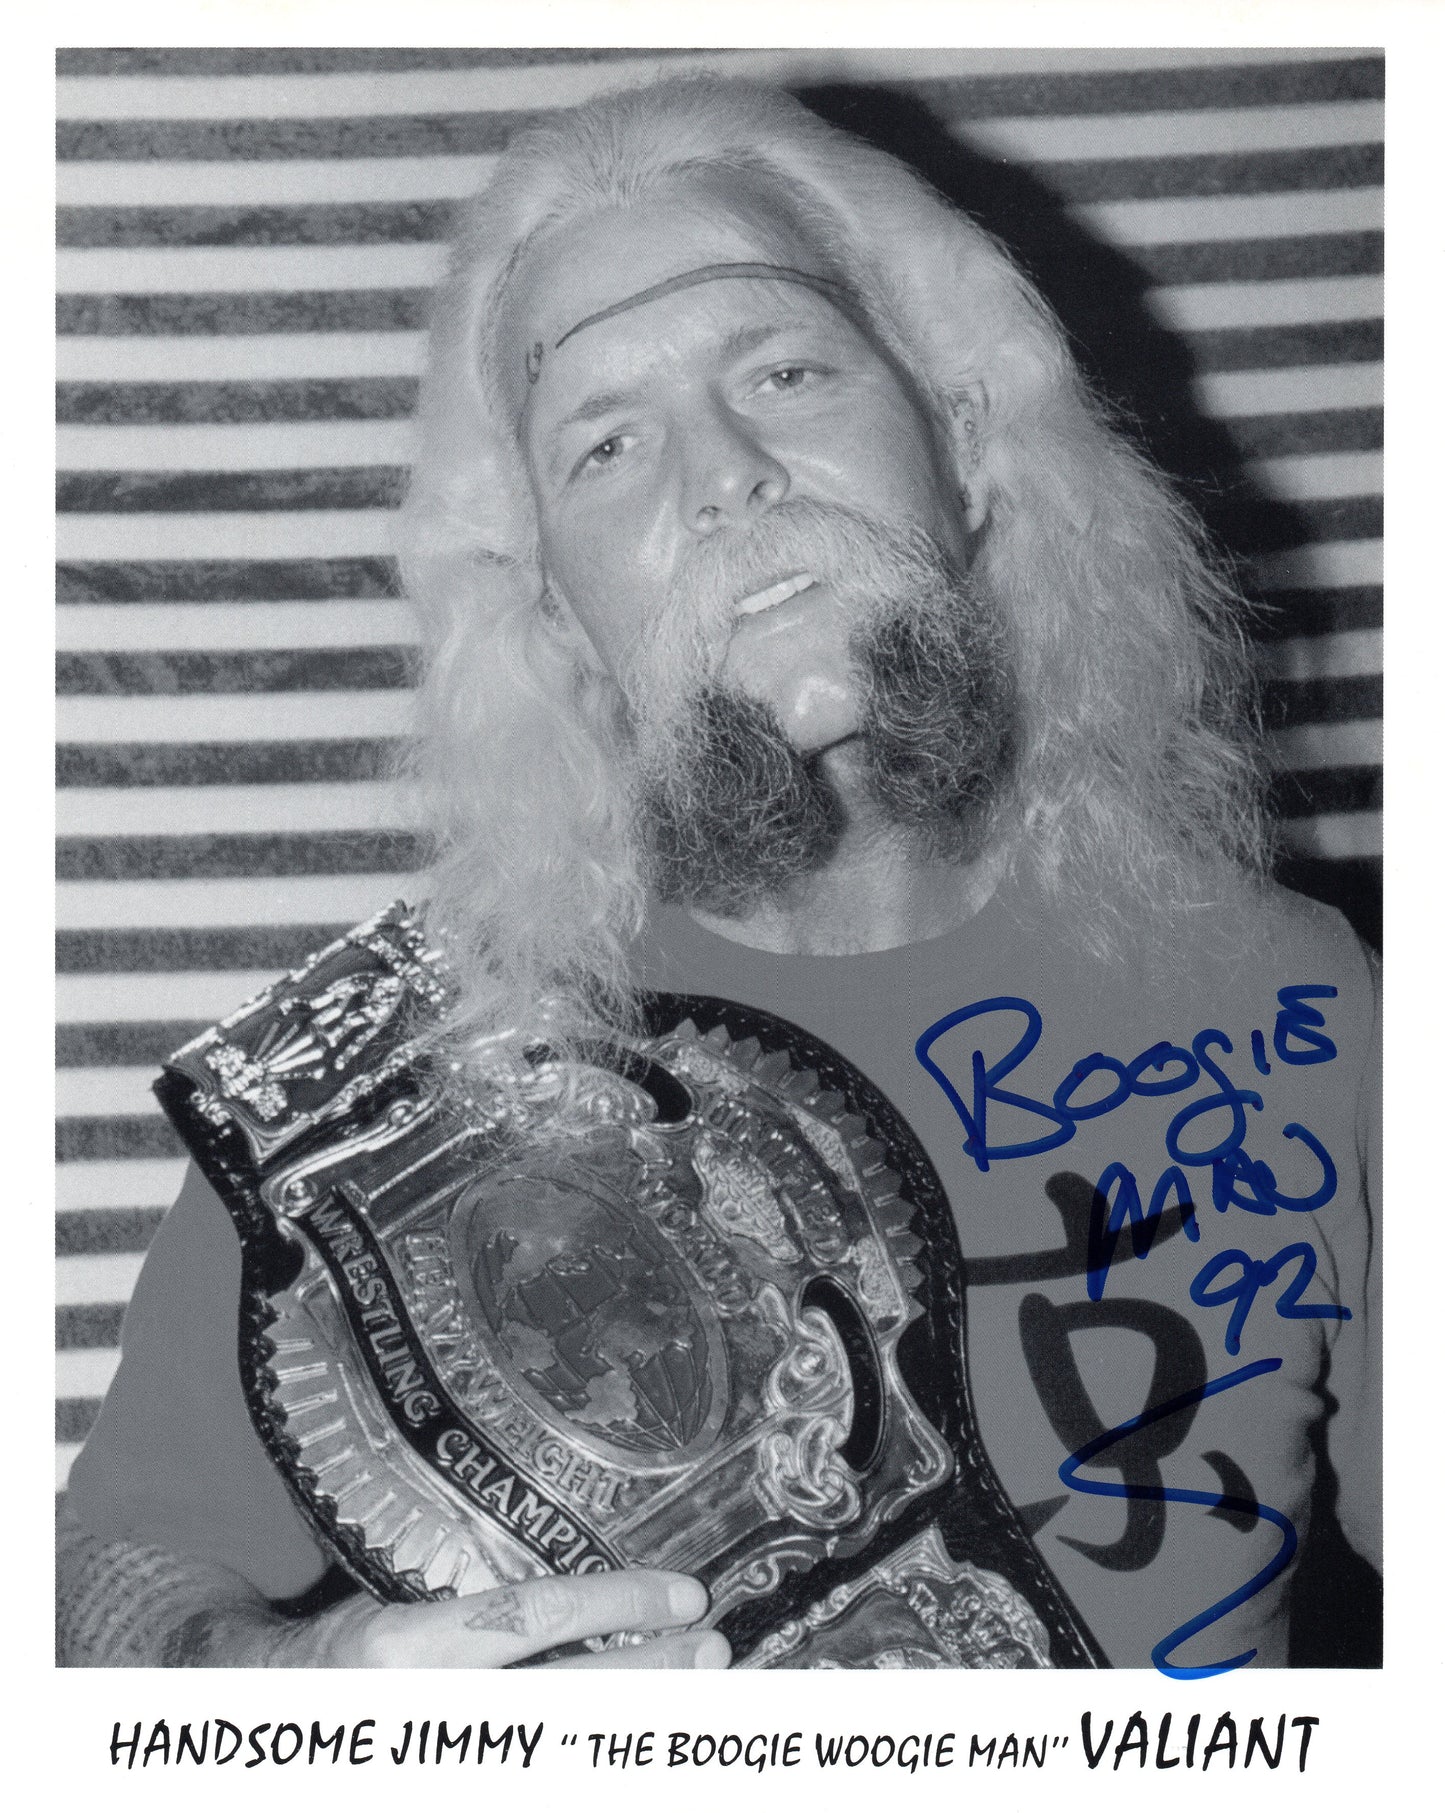 Handsome Jimmy The Boogie Woogie Man Valiant USWA Wrestling Signed Promo Photo